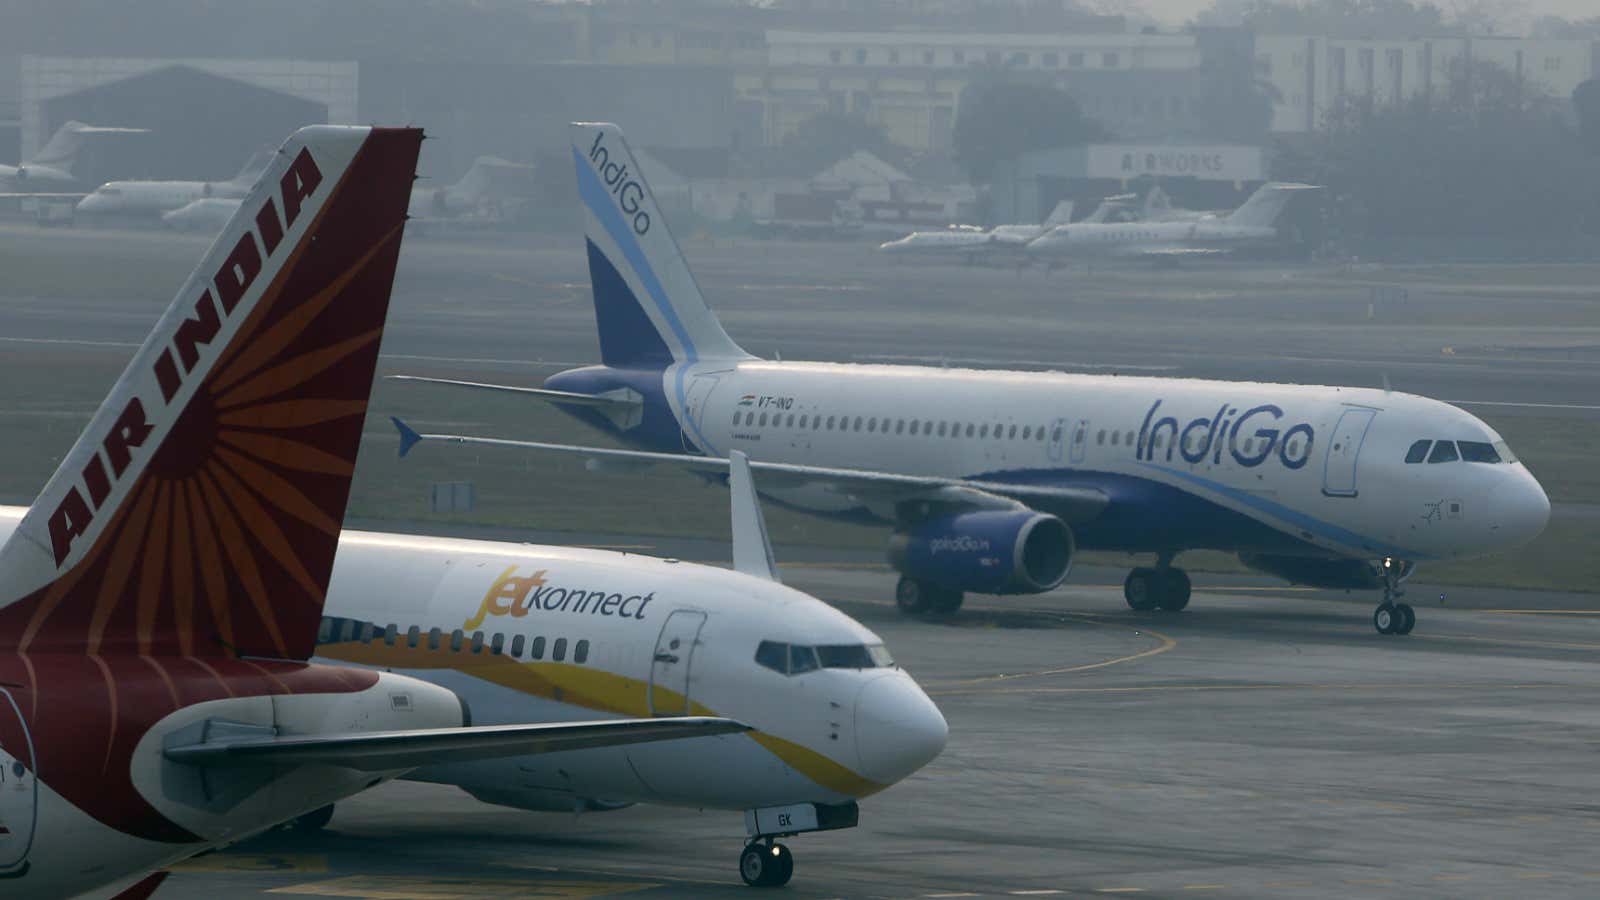 India is currently the 10th largest aviation market in the world.